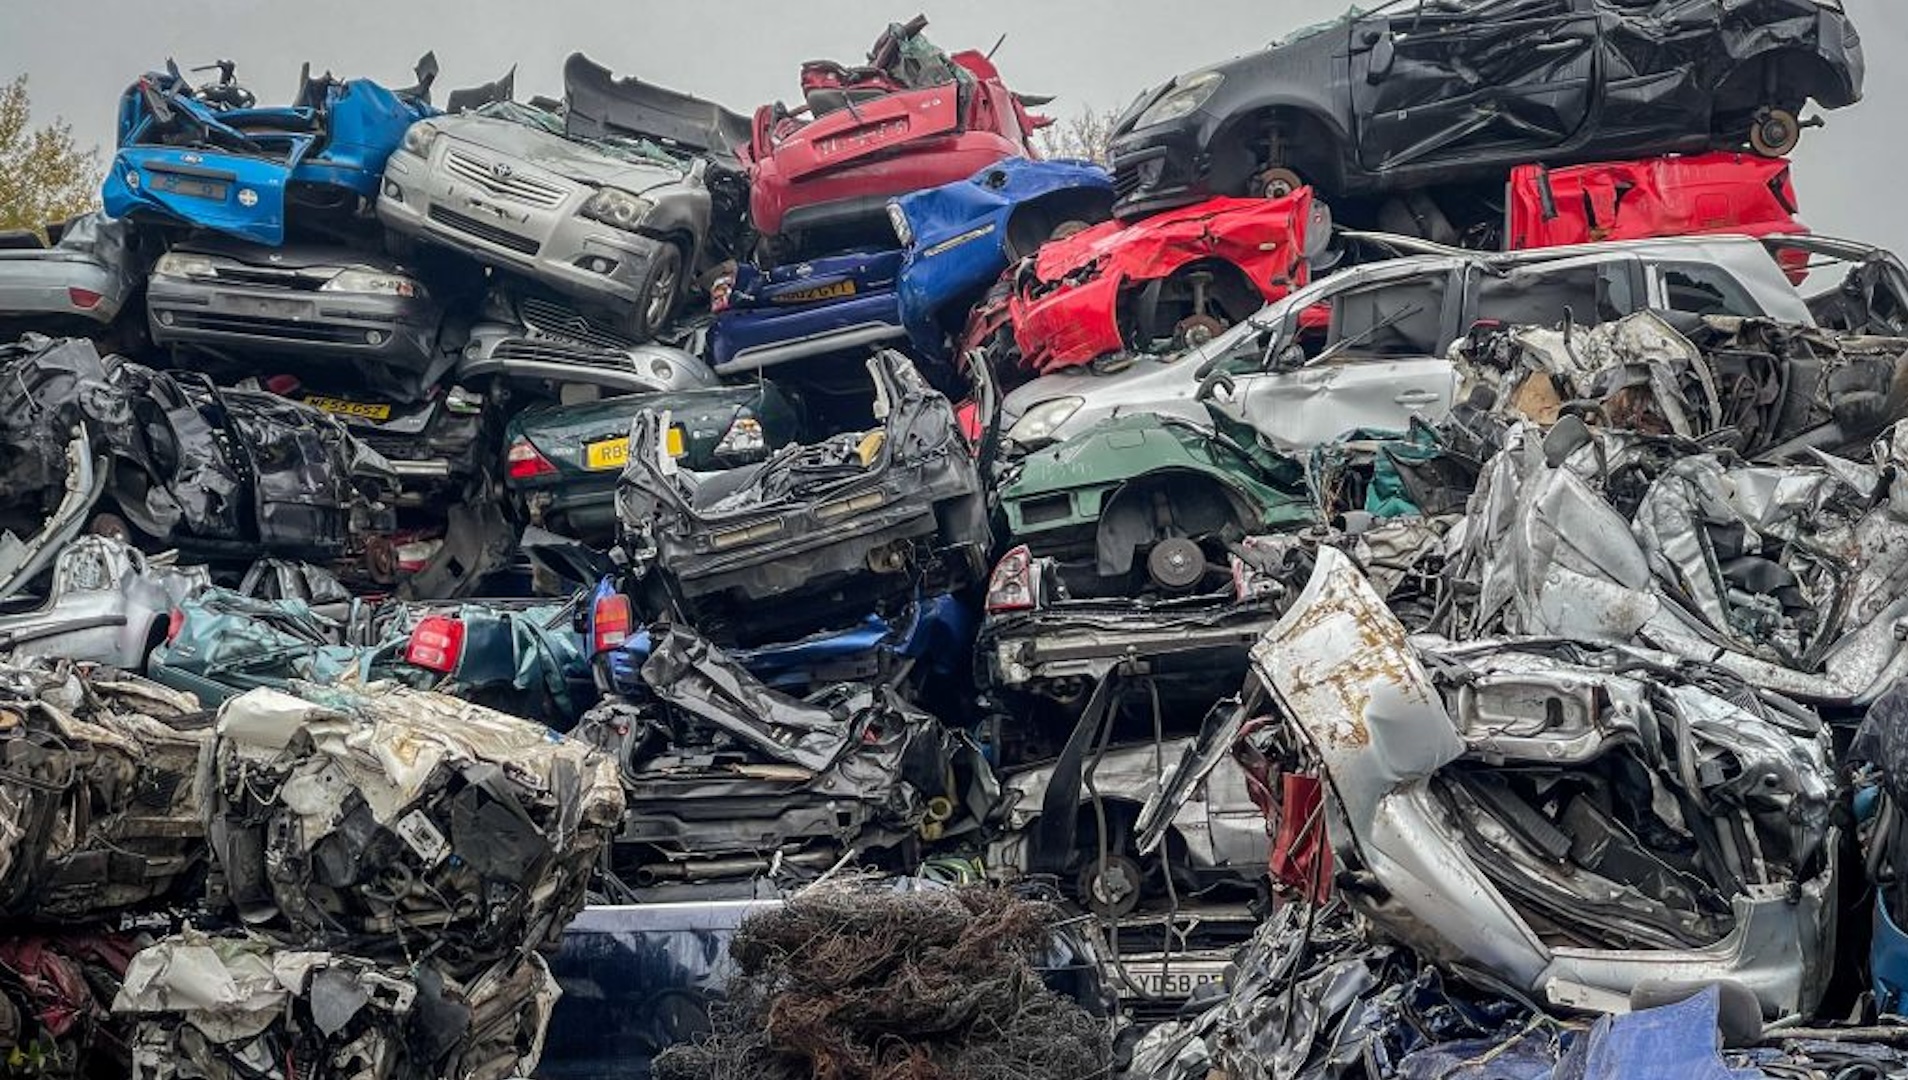 End of life petrol and diesel cars and vans are piled on top of one another as they wait to be recycled in a car scrapyard on November 29, 2022 in Glastonbury, England. The UK scraps over one million cars a year and many more petrol and diesel cars will need to be taken off the road if the Government is to reach its target for the number of electric cars to be reached.